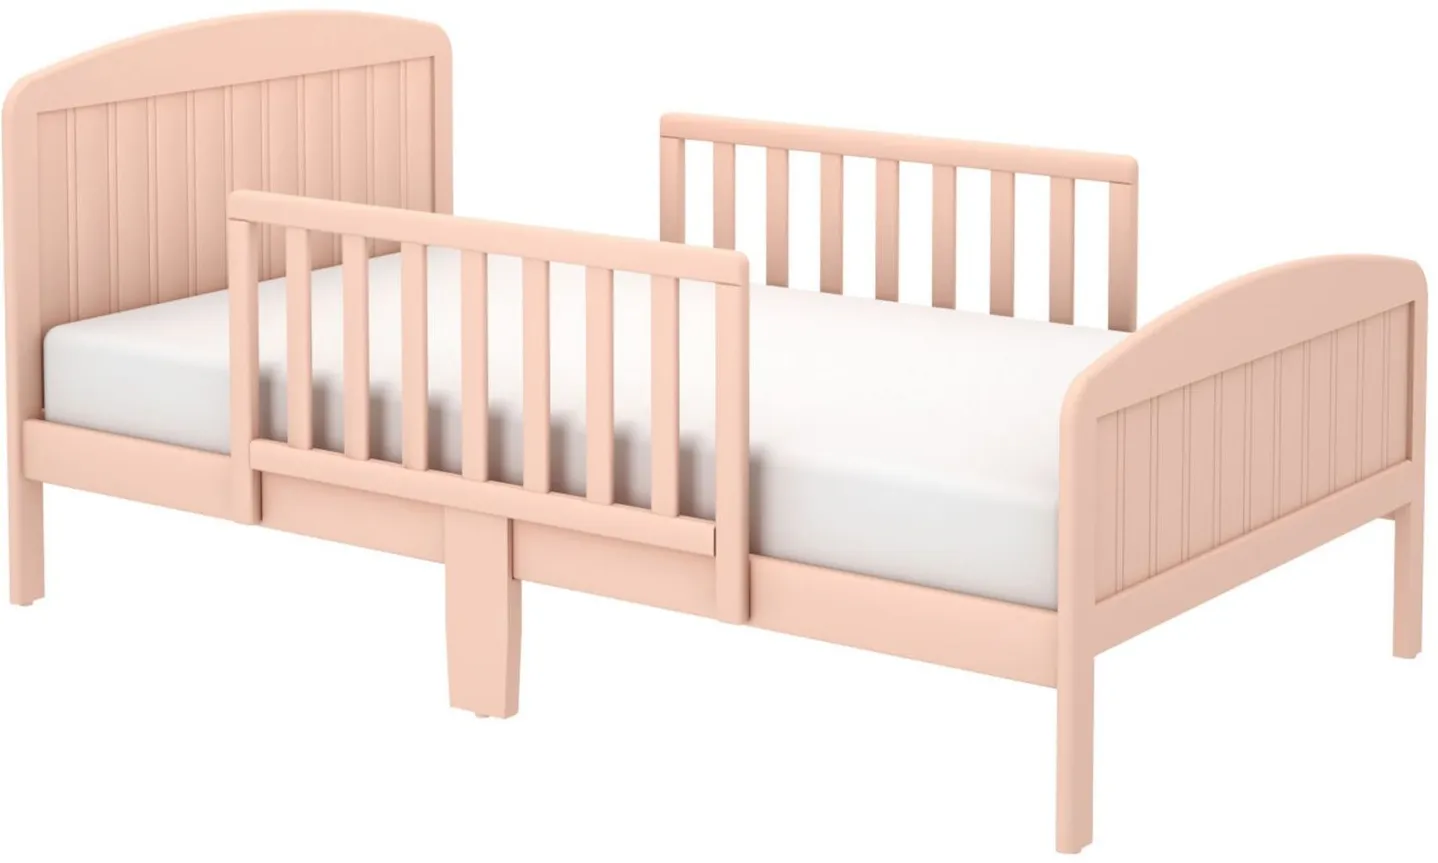 Harrisburg Toddler Bed in Clay by BK Furniture